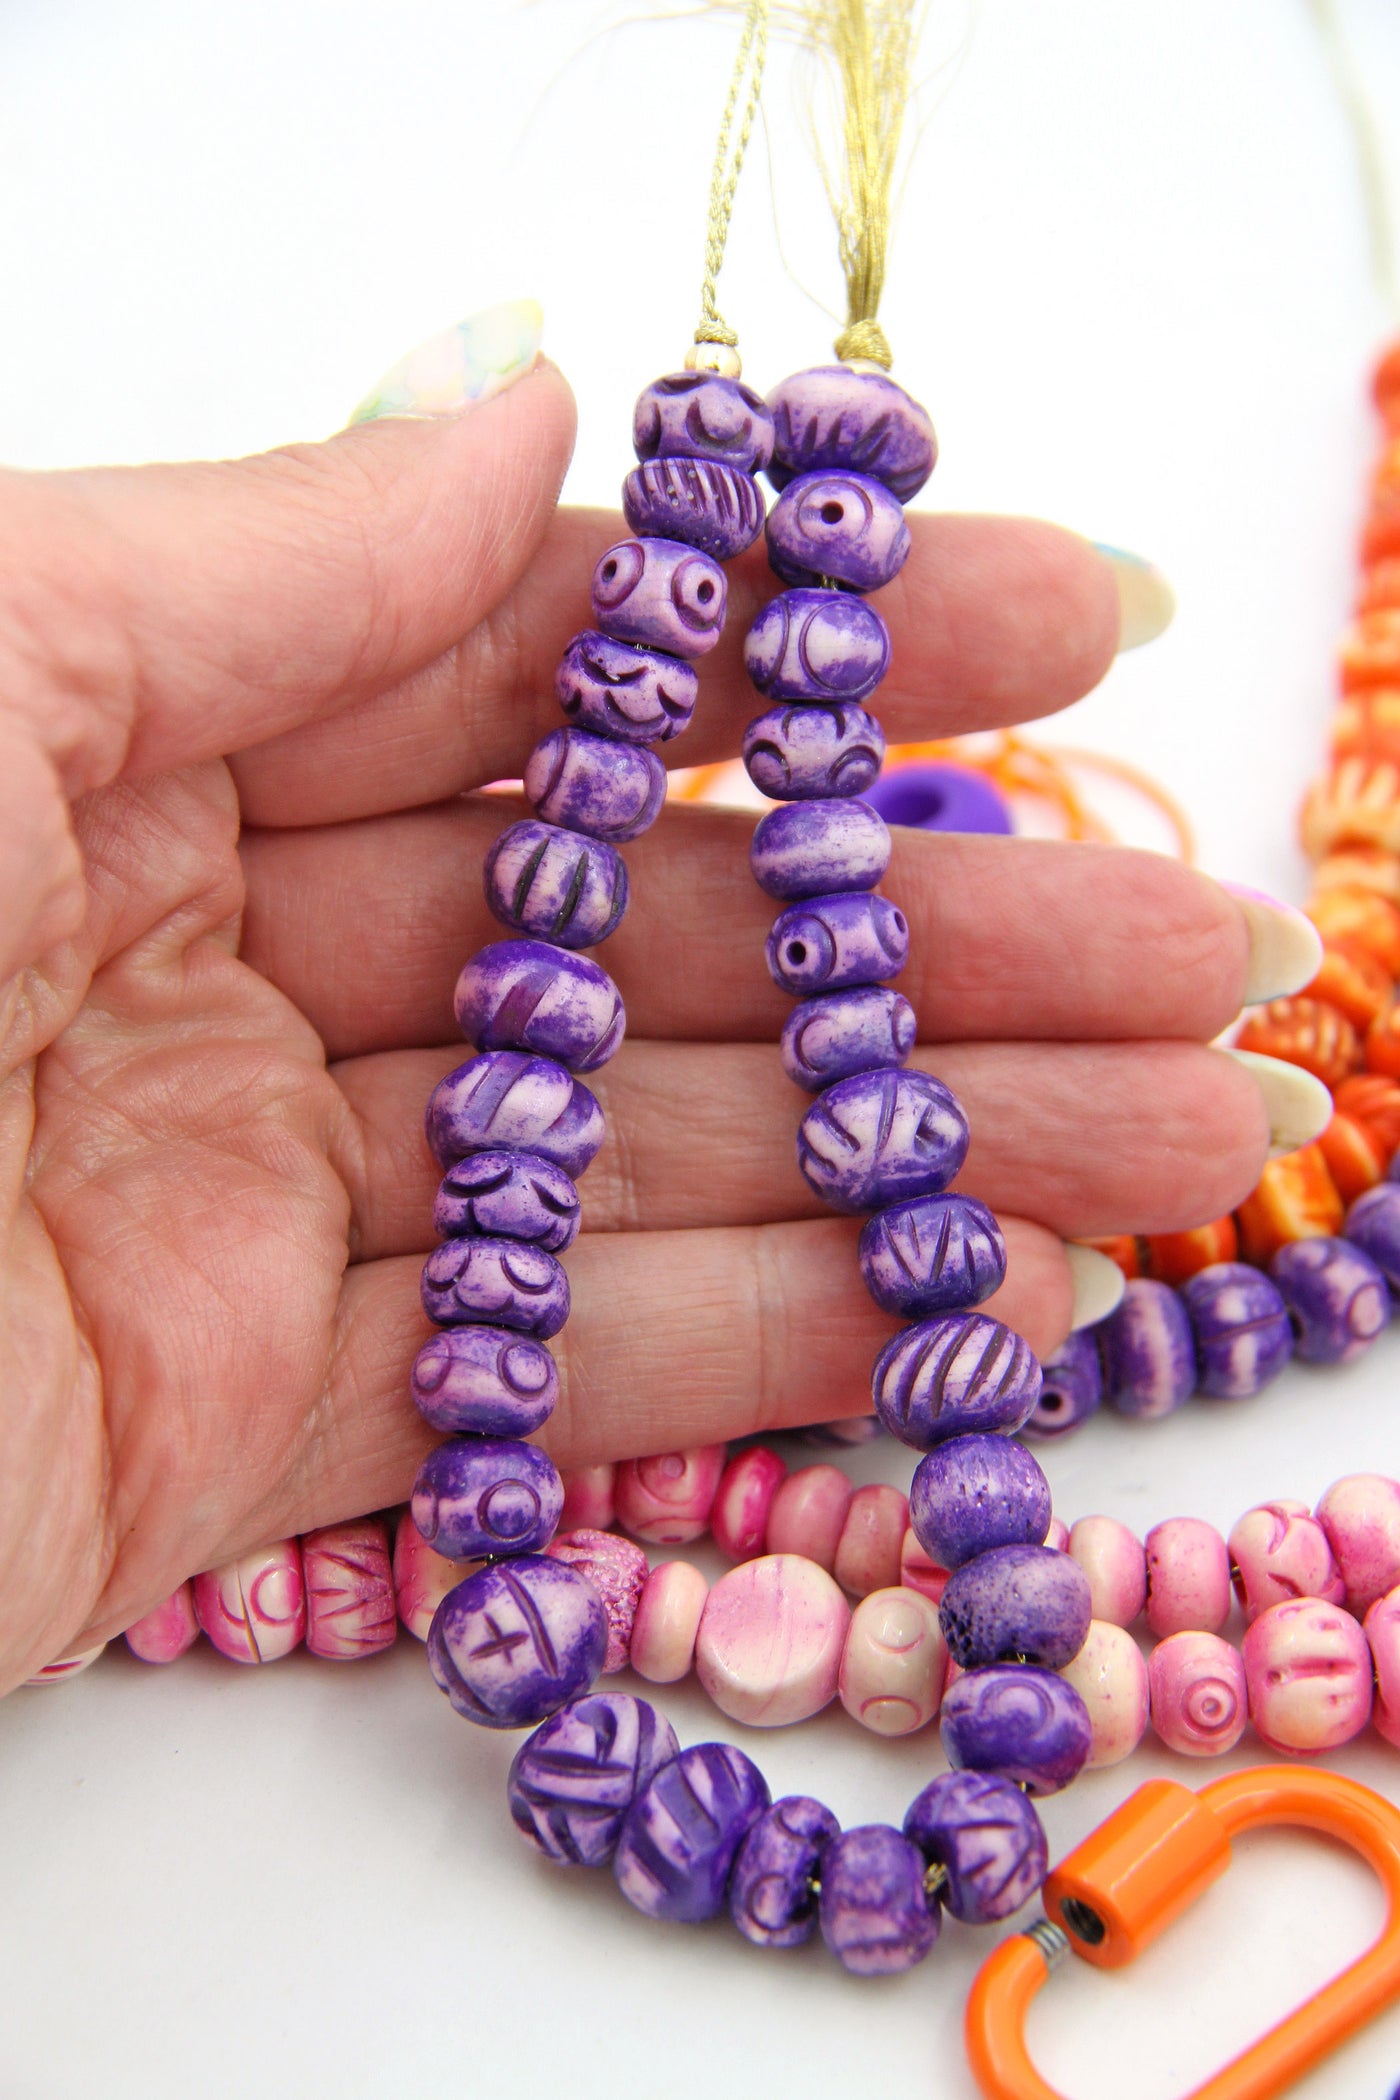 Mixed Party Bright Bone Beads: Hand Carved Assortment, Pink, Orange, Purple, 10-12mm